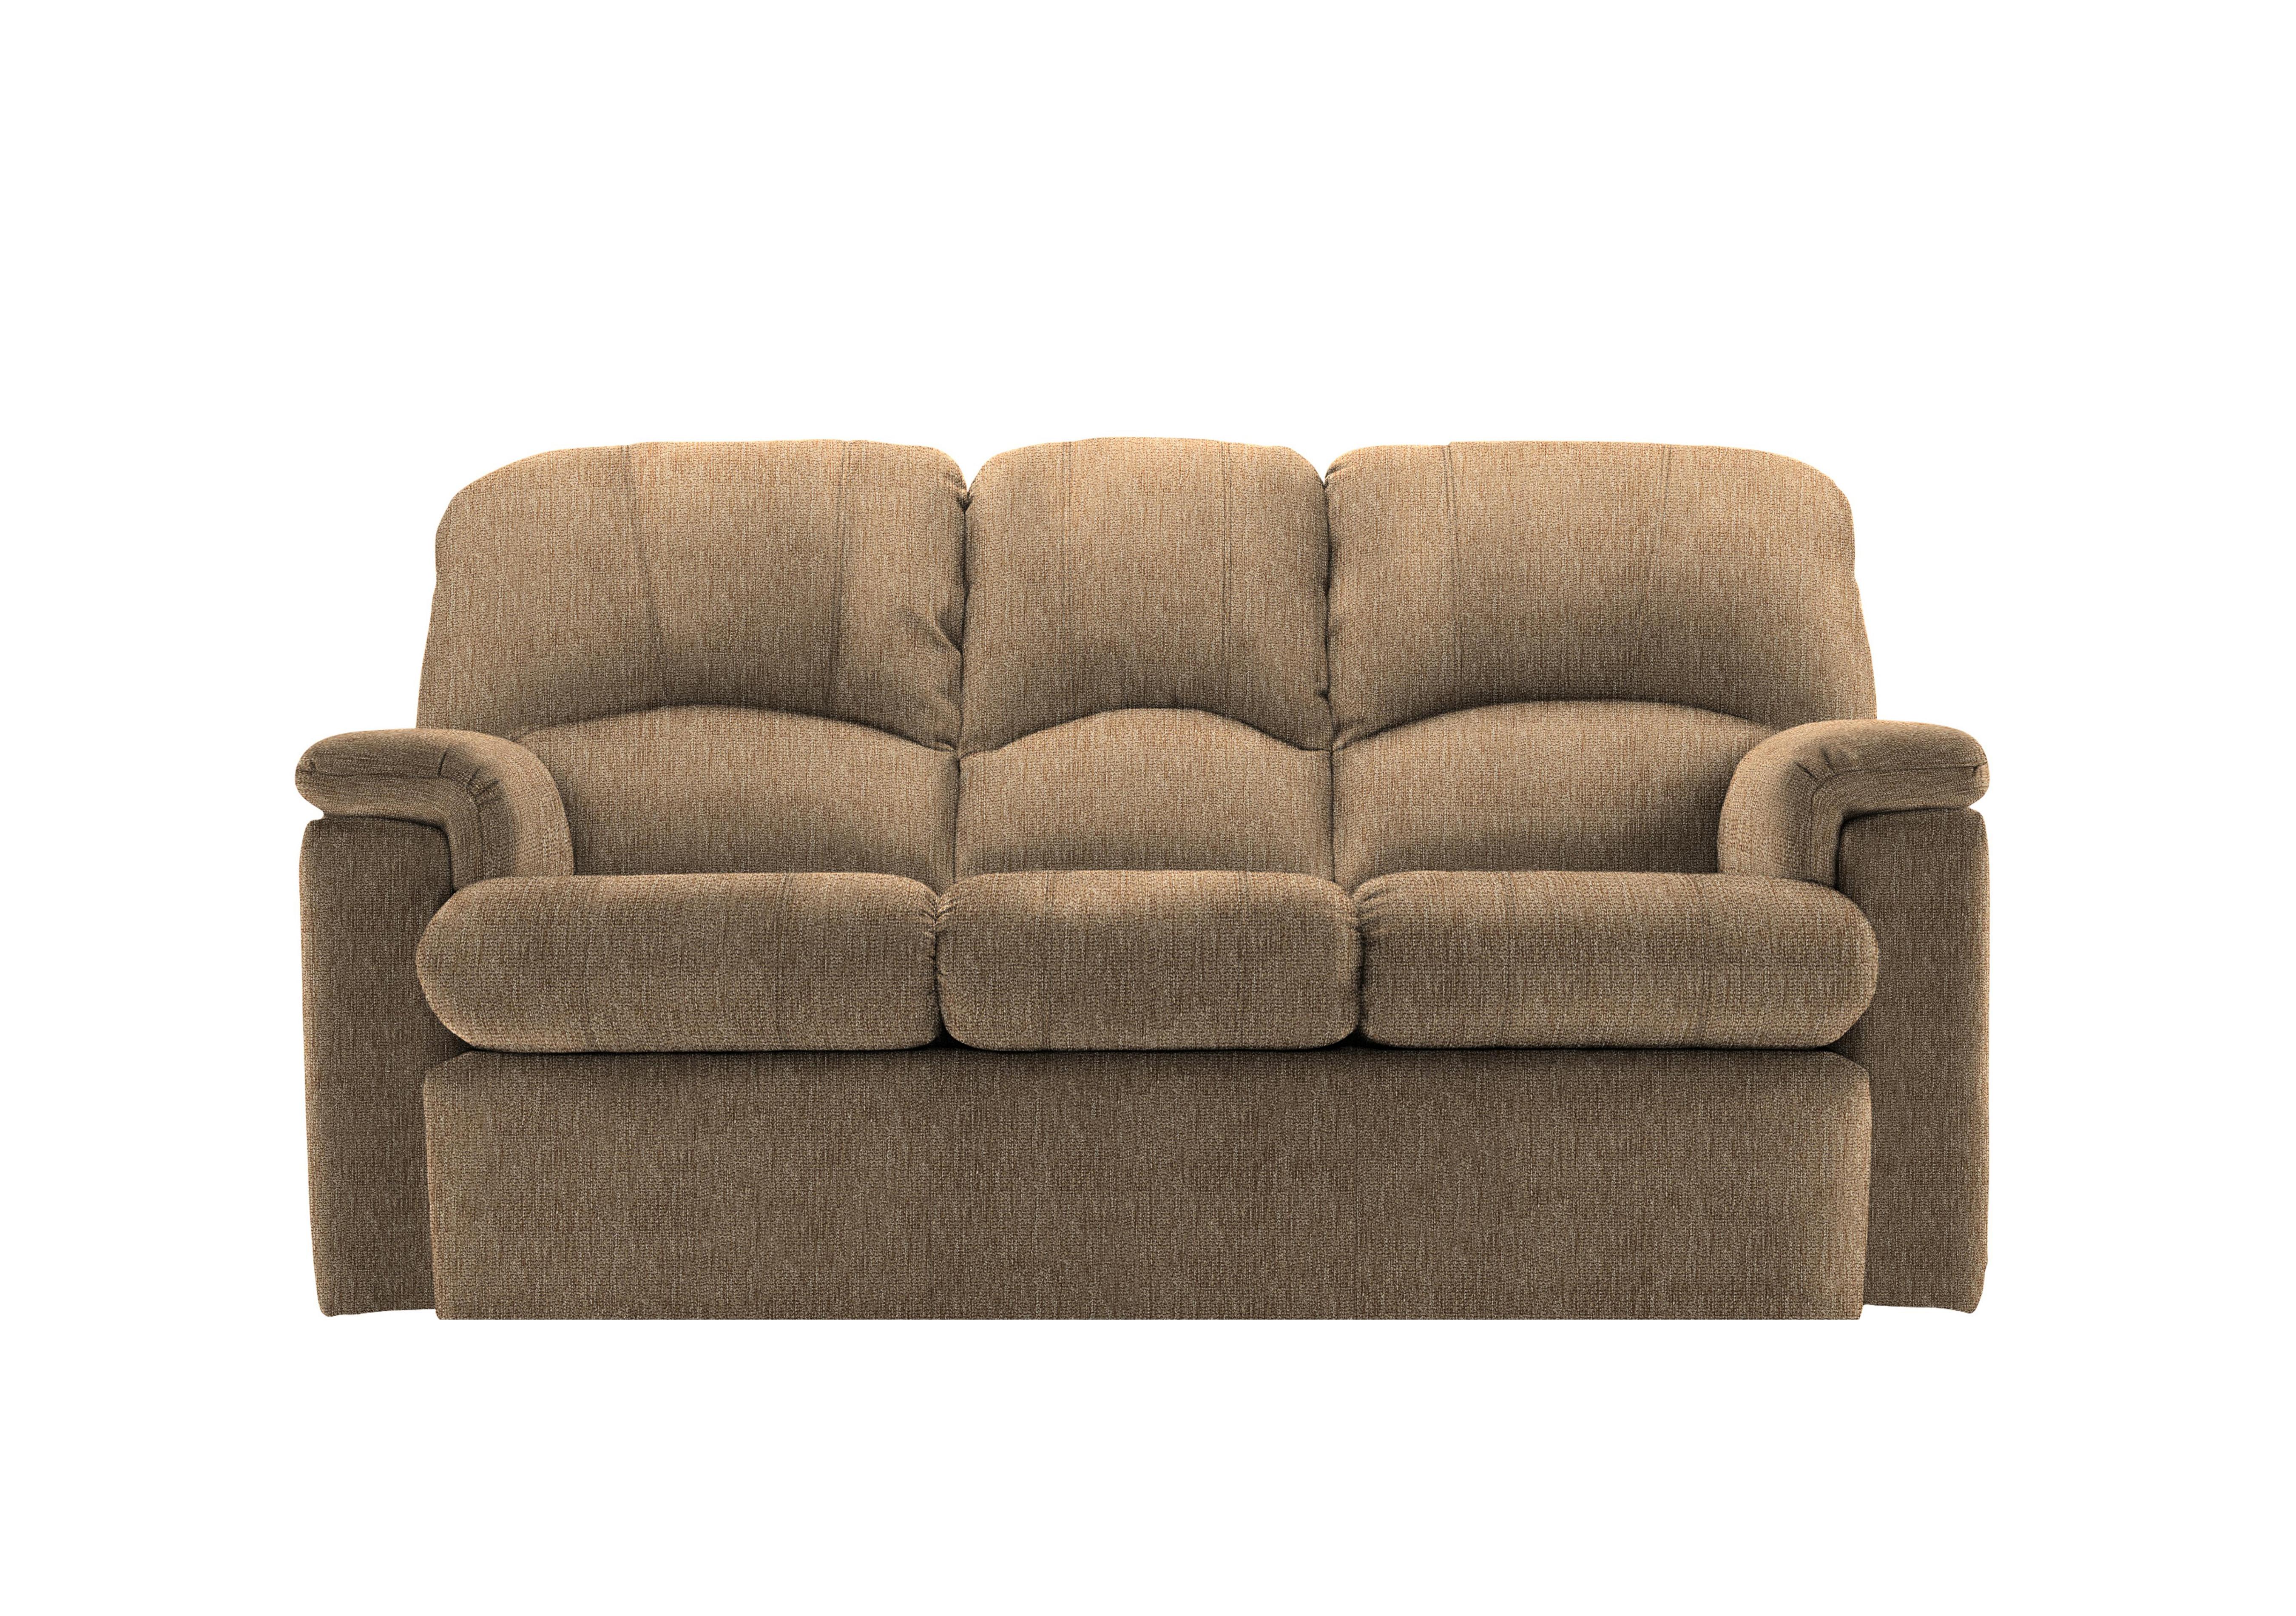 Chloe Small Fabric 3 Seater Sofa in A070 Boucle Cocoa on Furniture Village